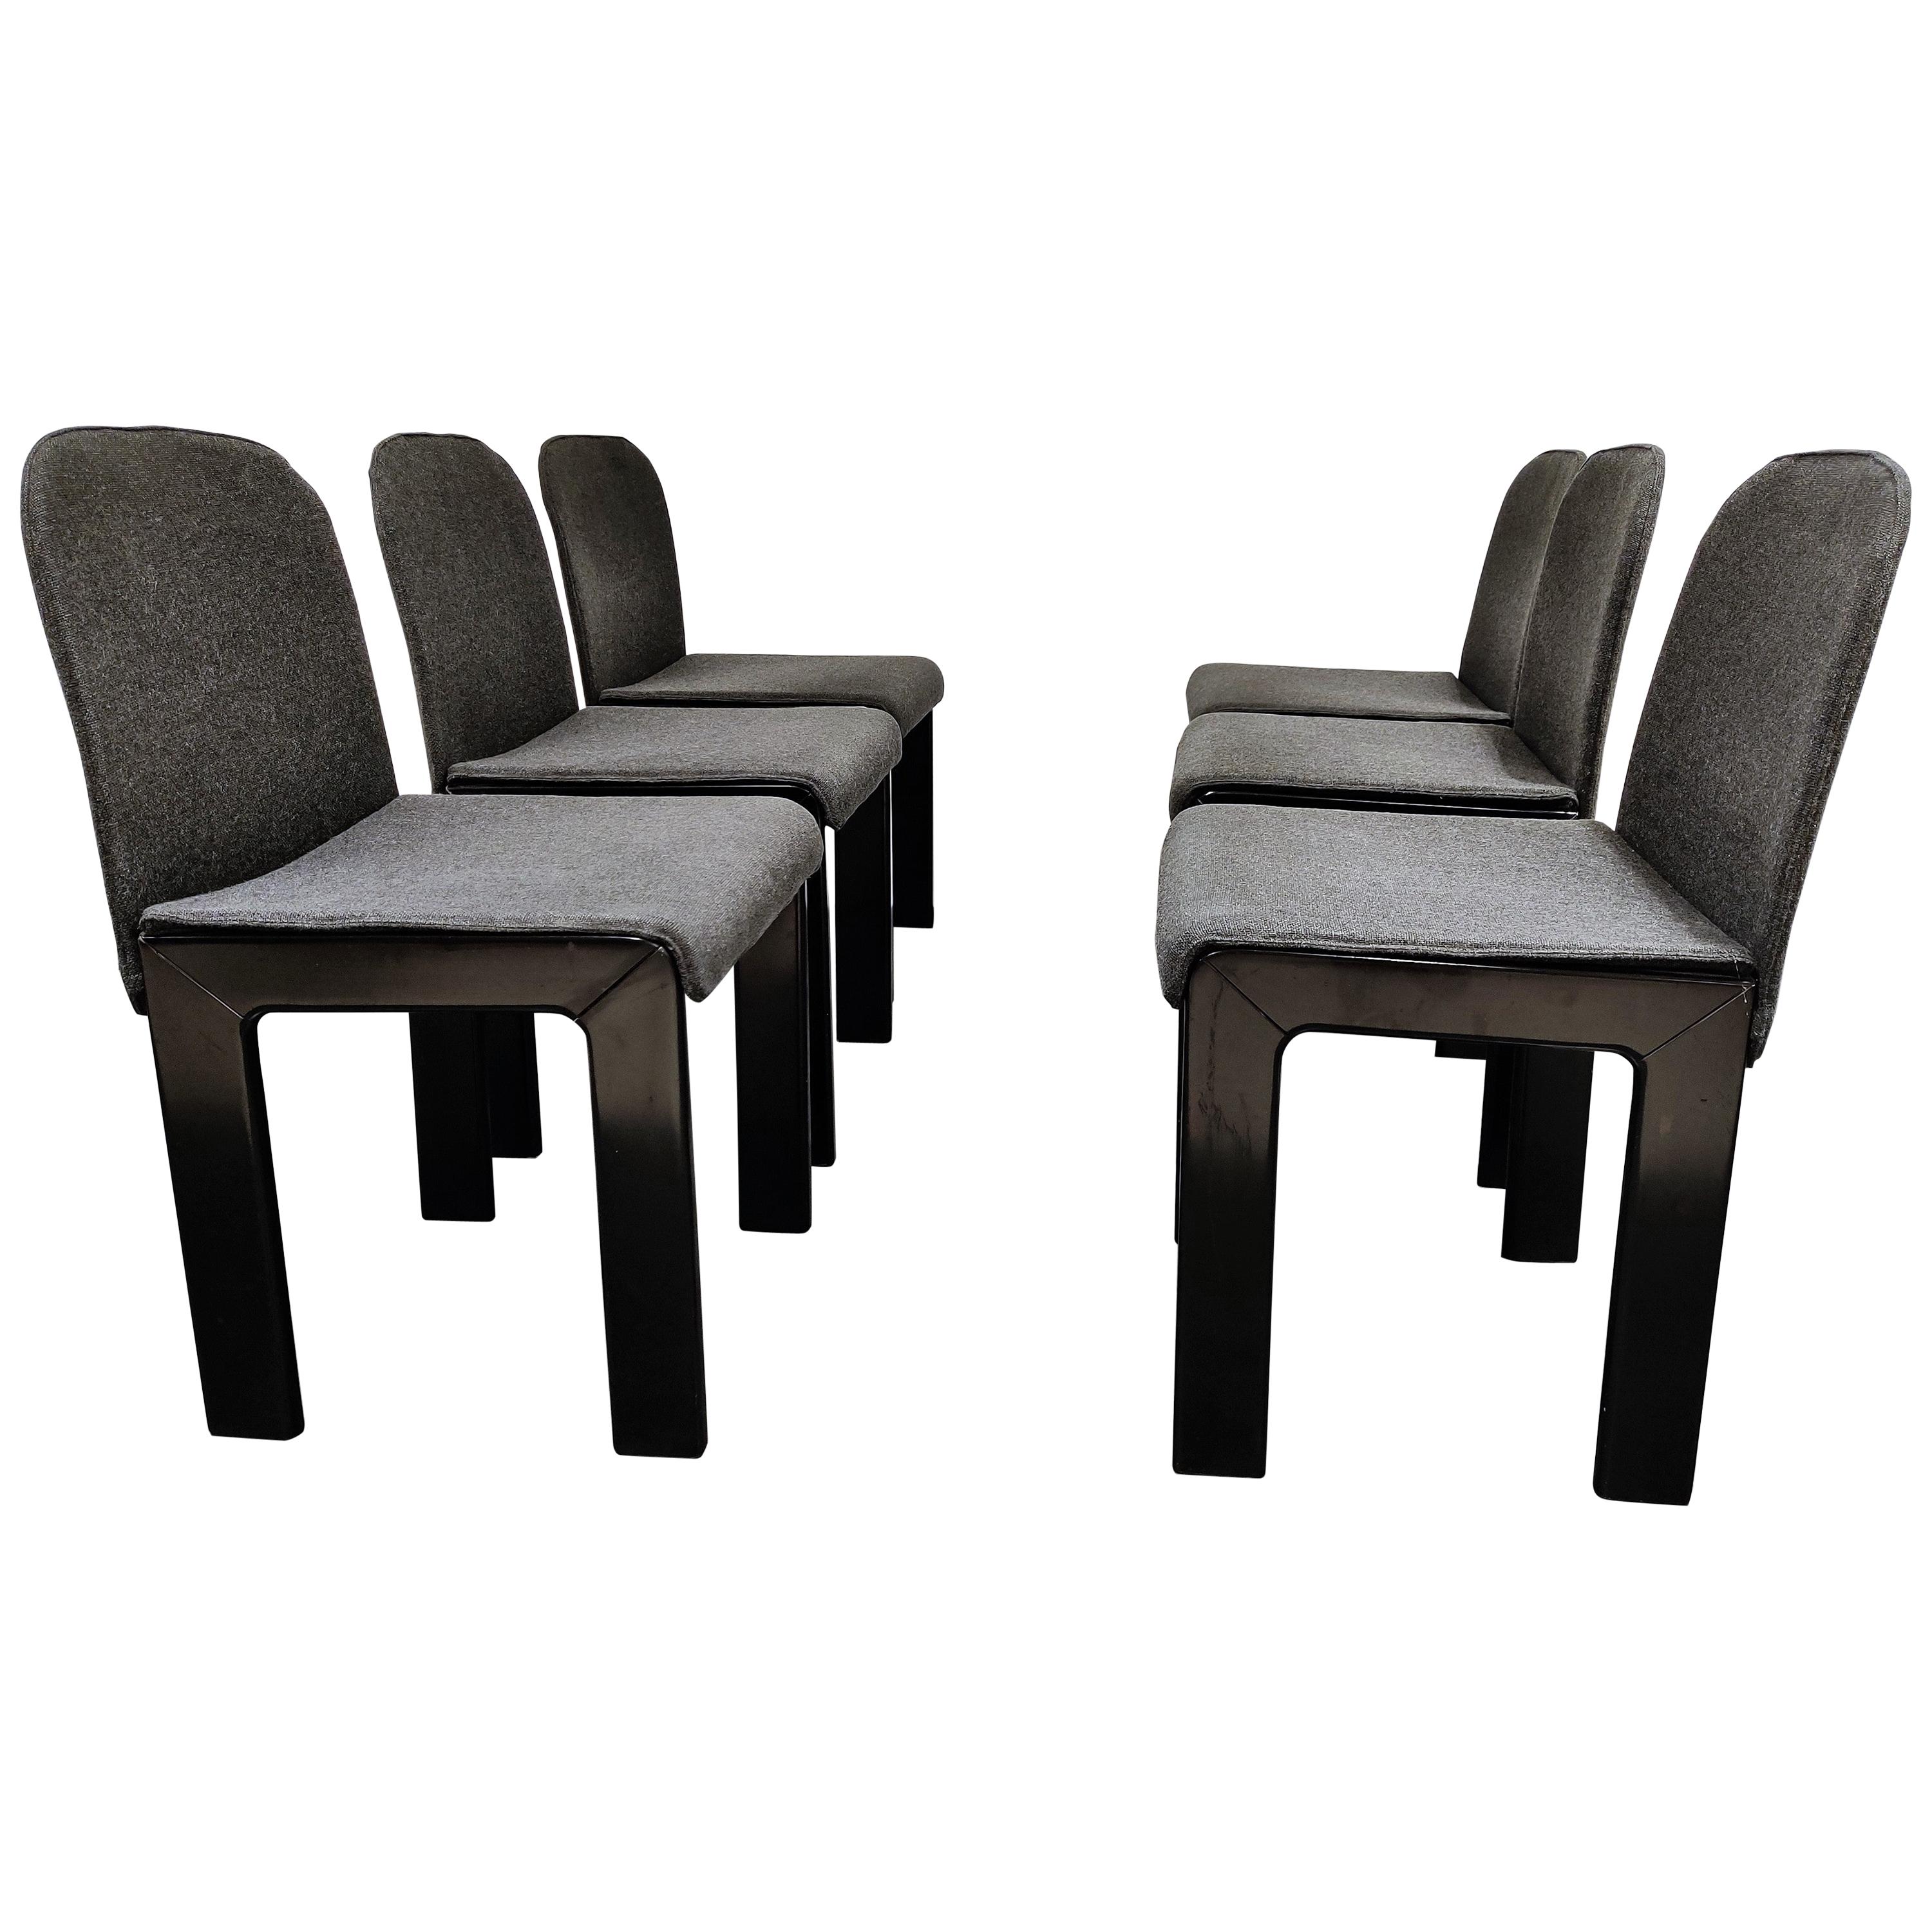 Tobia Scarpa Dining Chairs Model 121, Set of 6, 1970s